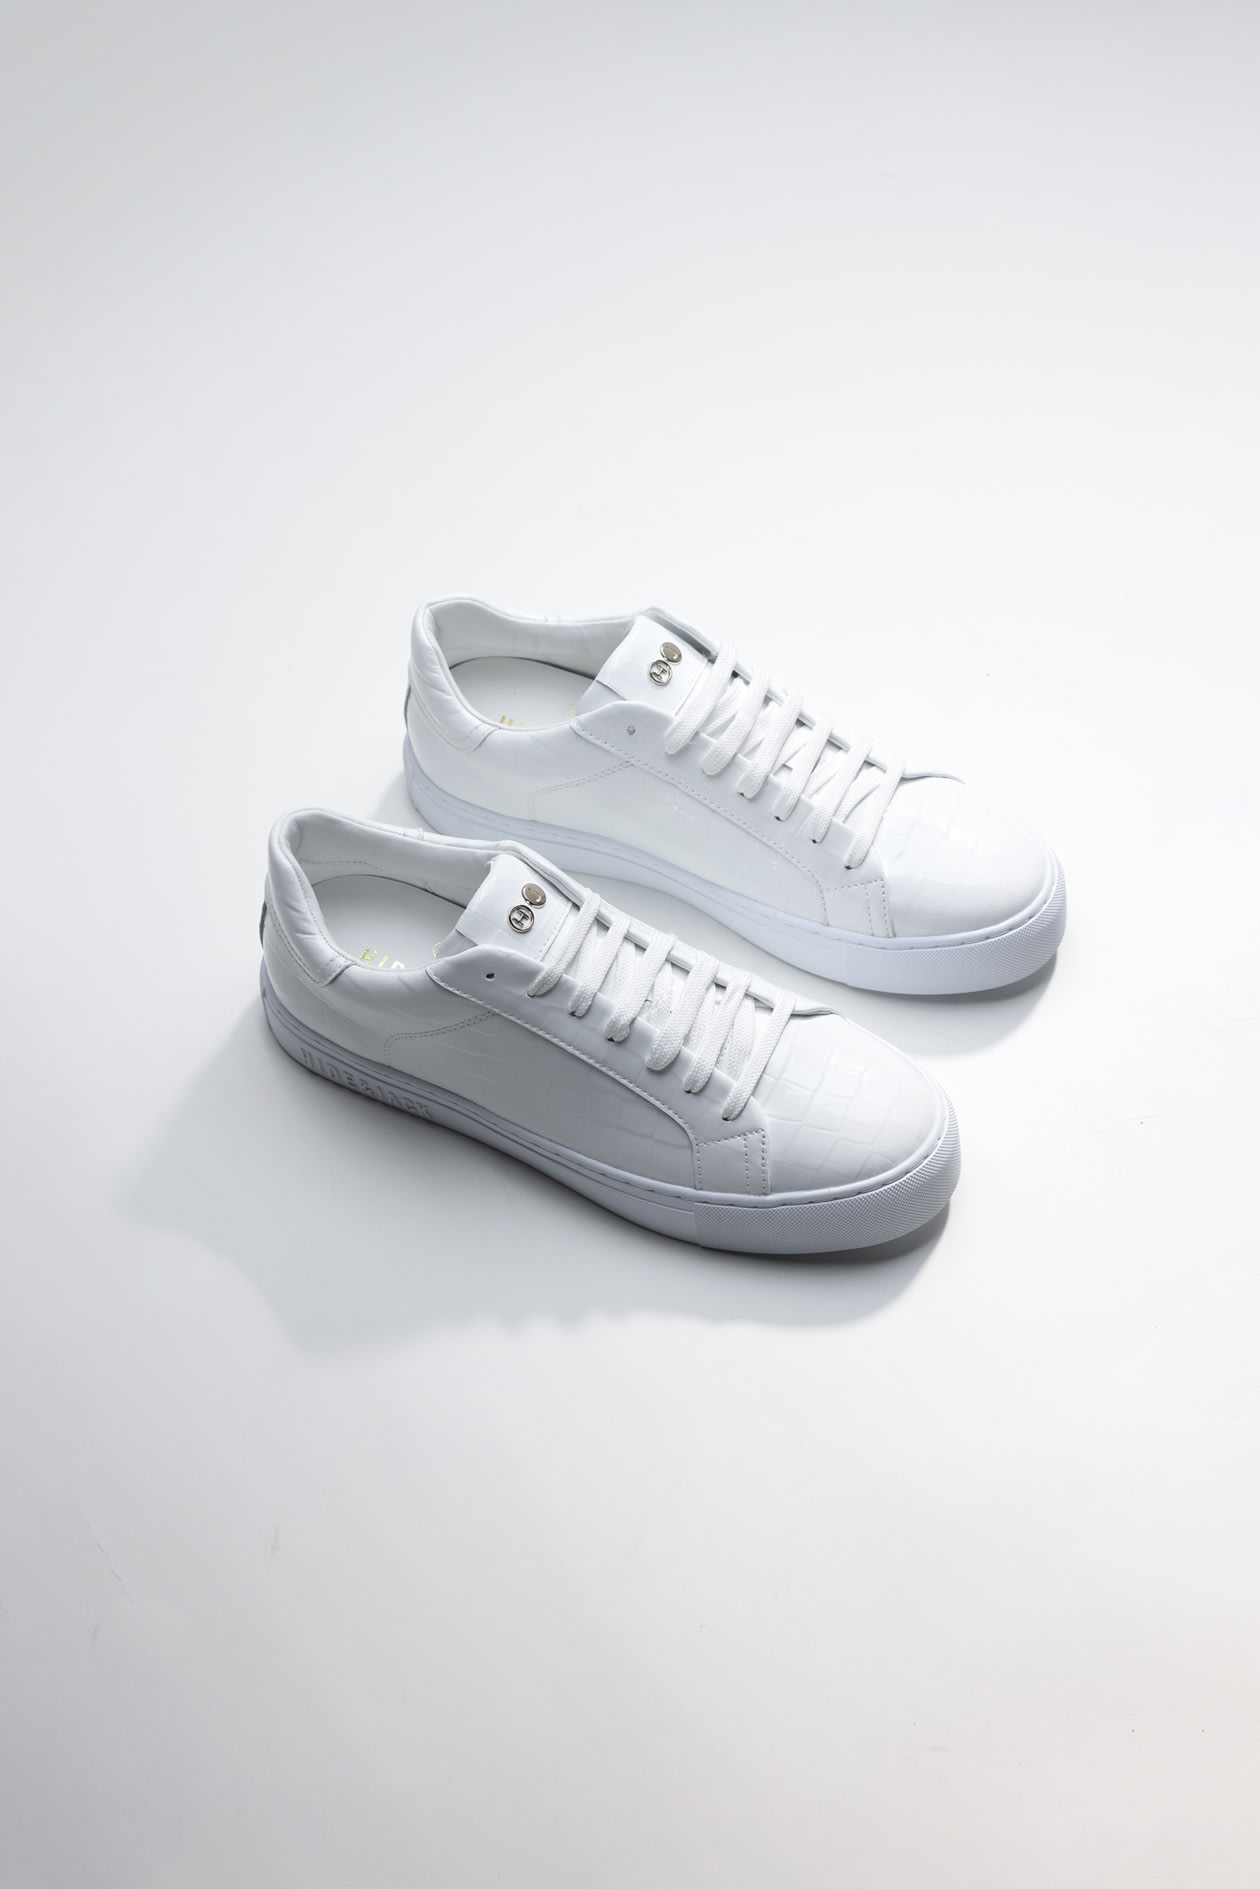 Hide&amp;jack Low Top Trainer - Essence Glamour White